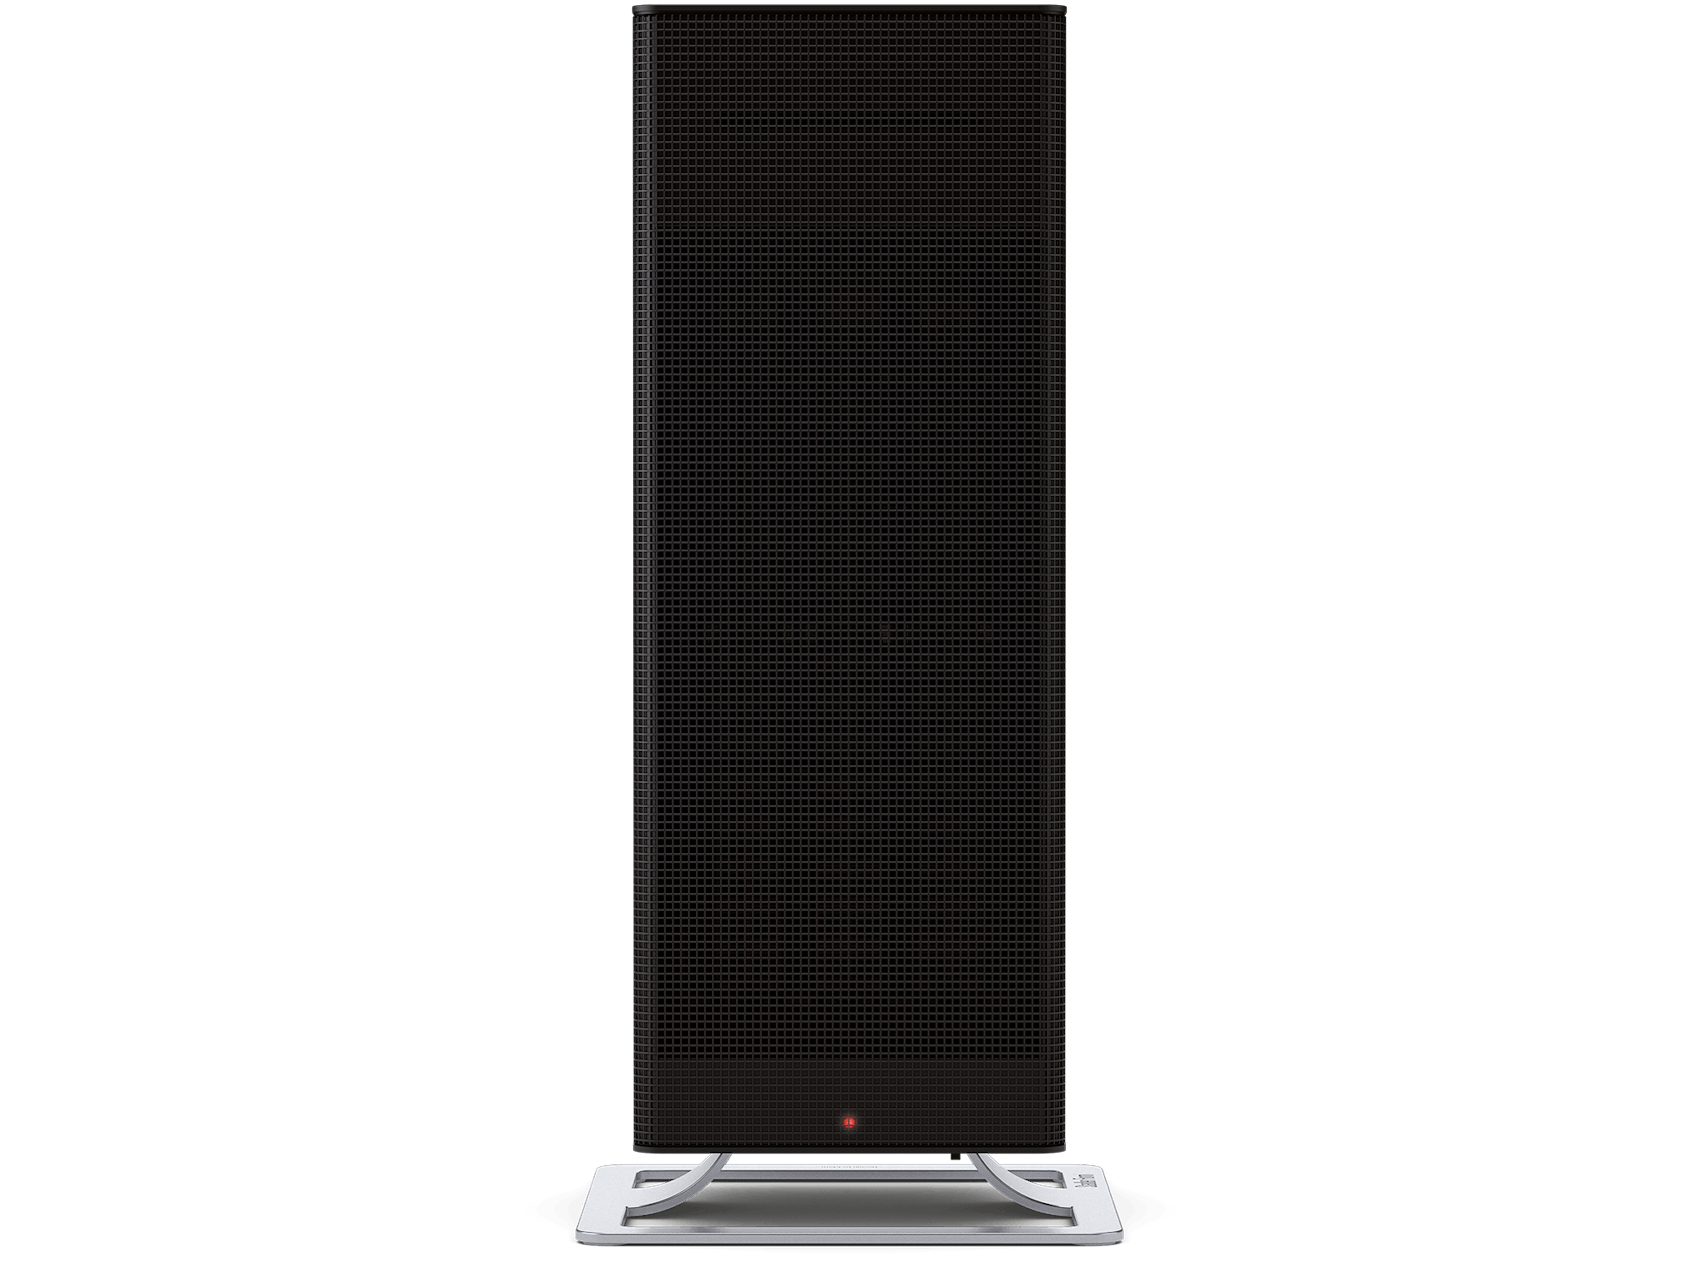 Anna big heater by Stadler Form in black as side view